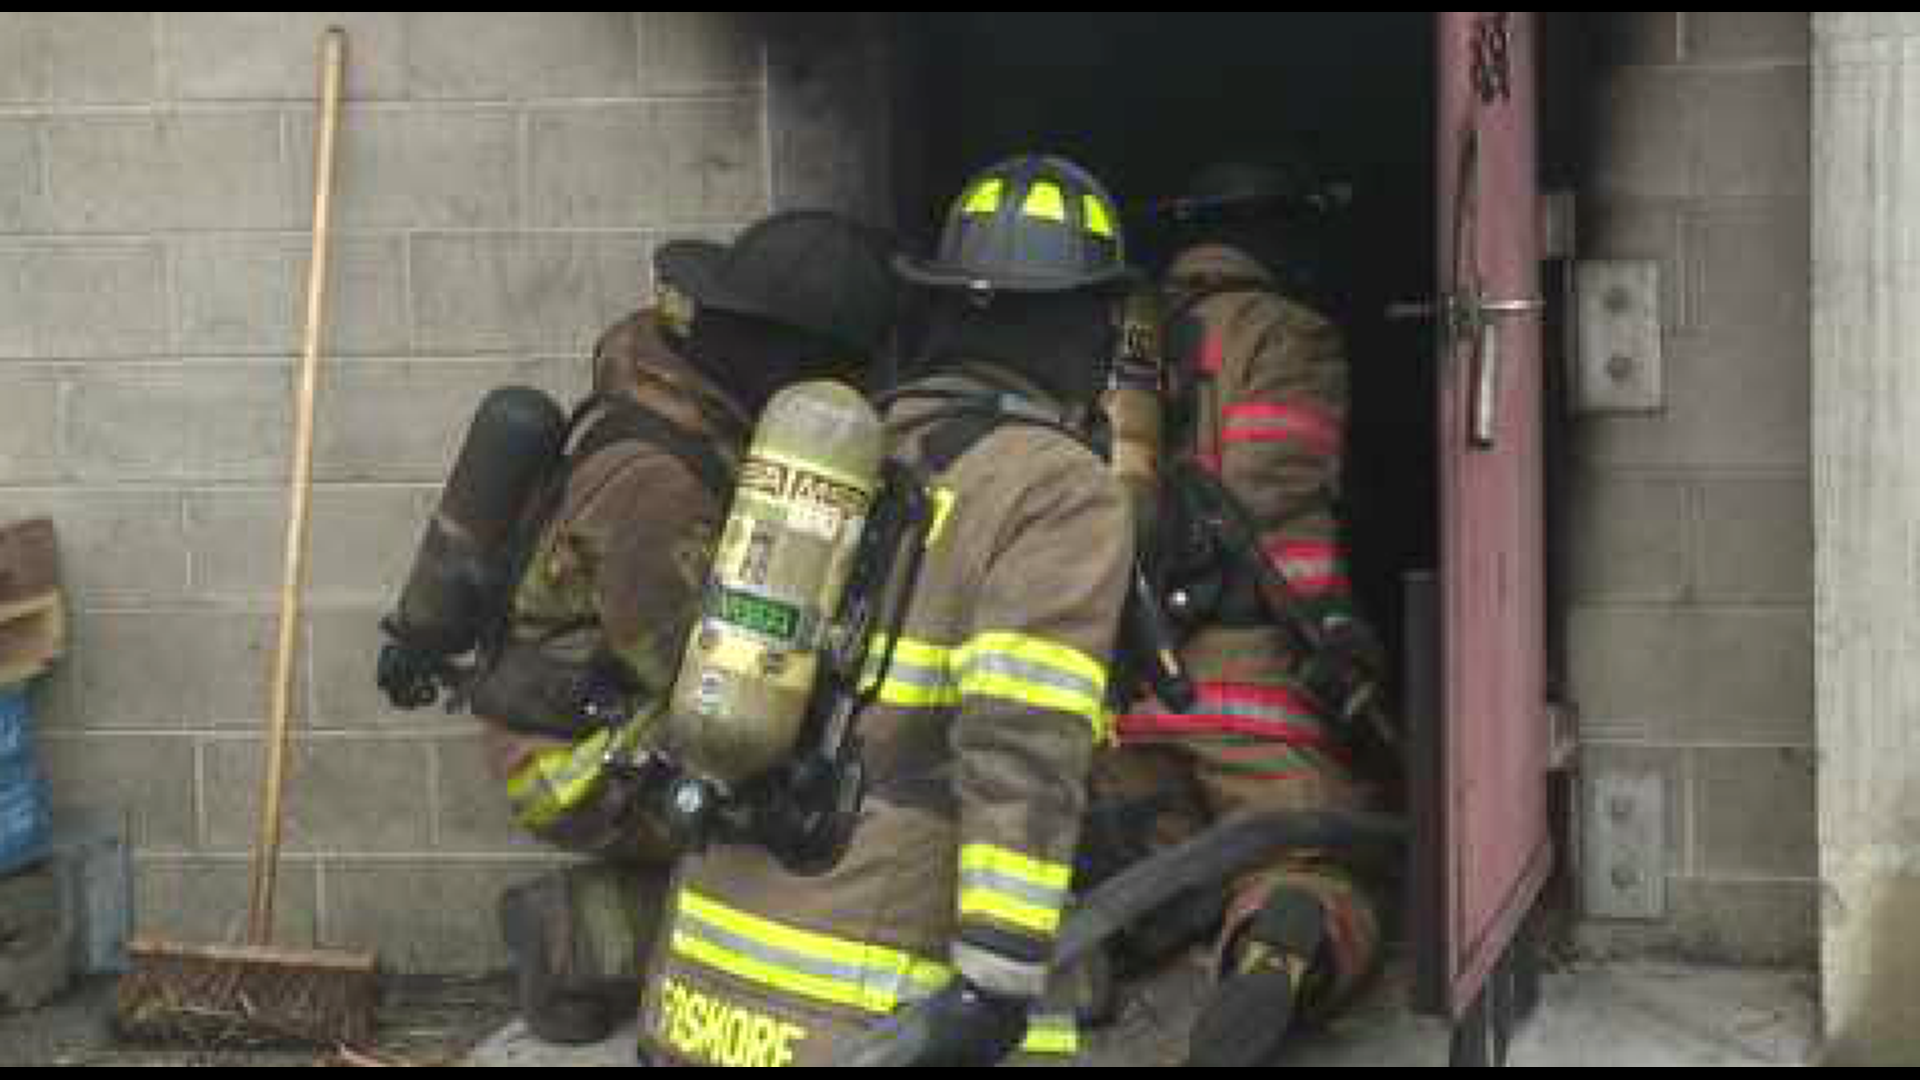 As call volumes increase, the number of volunteer firefighters nationwide dwindles.